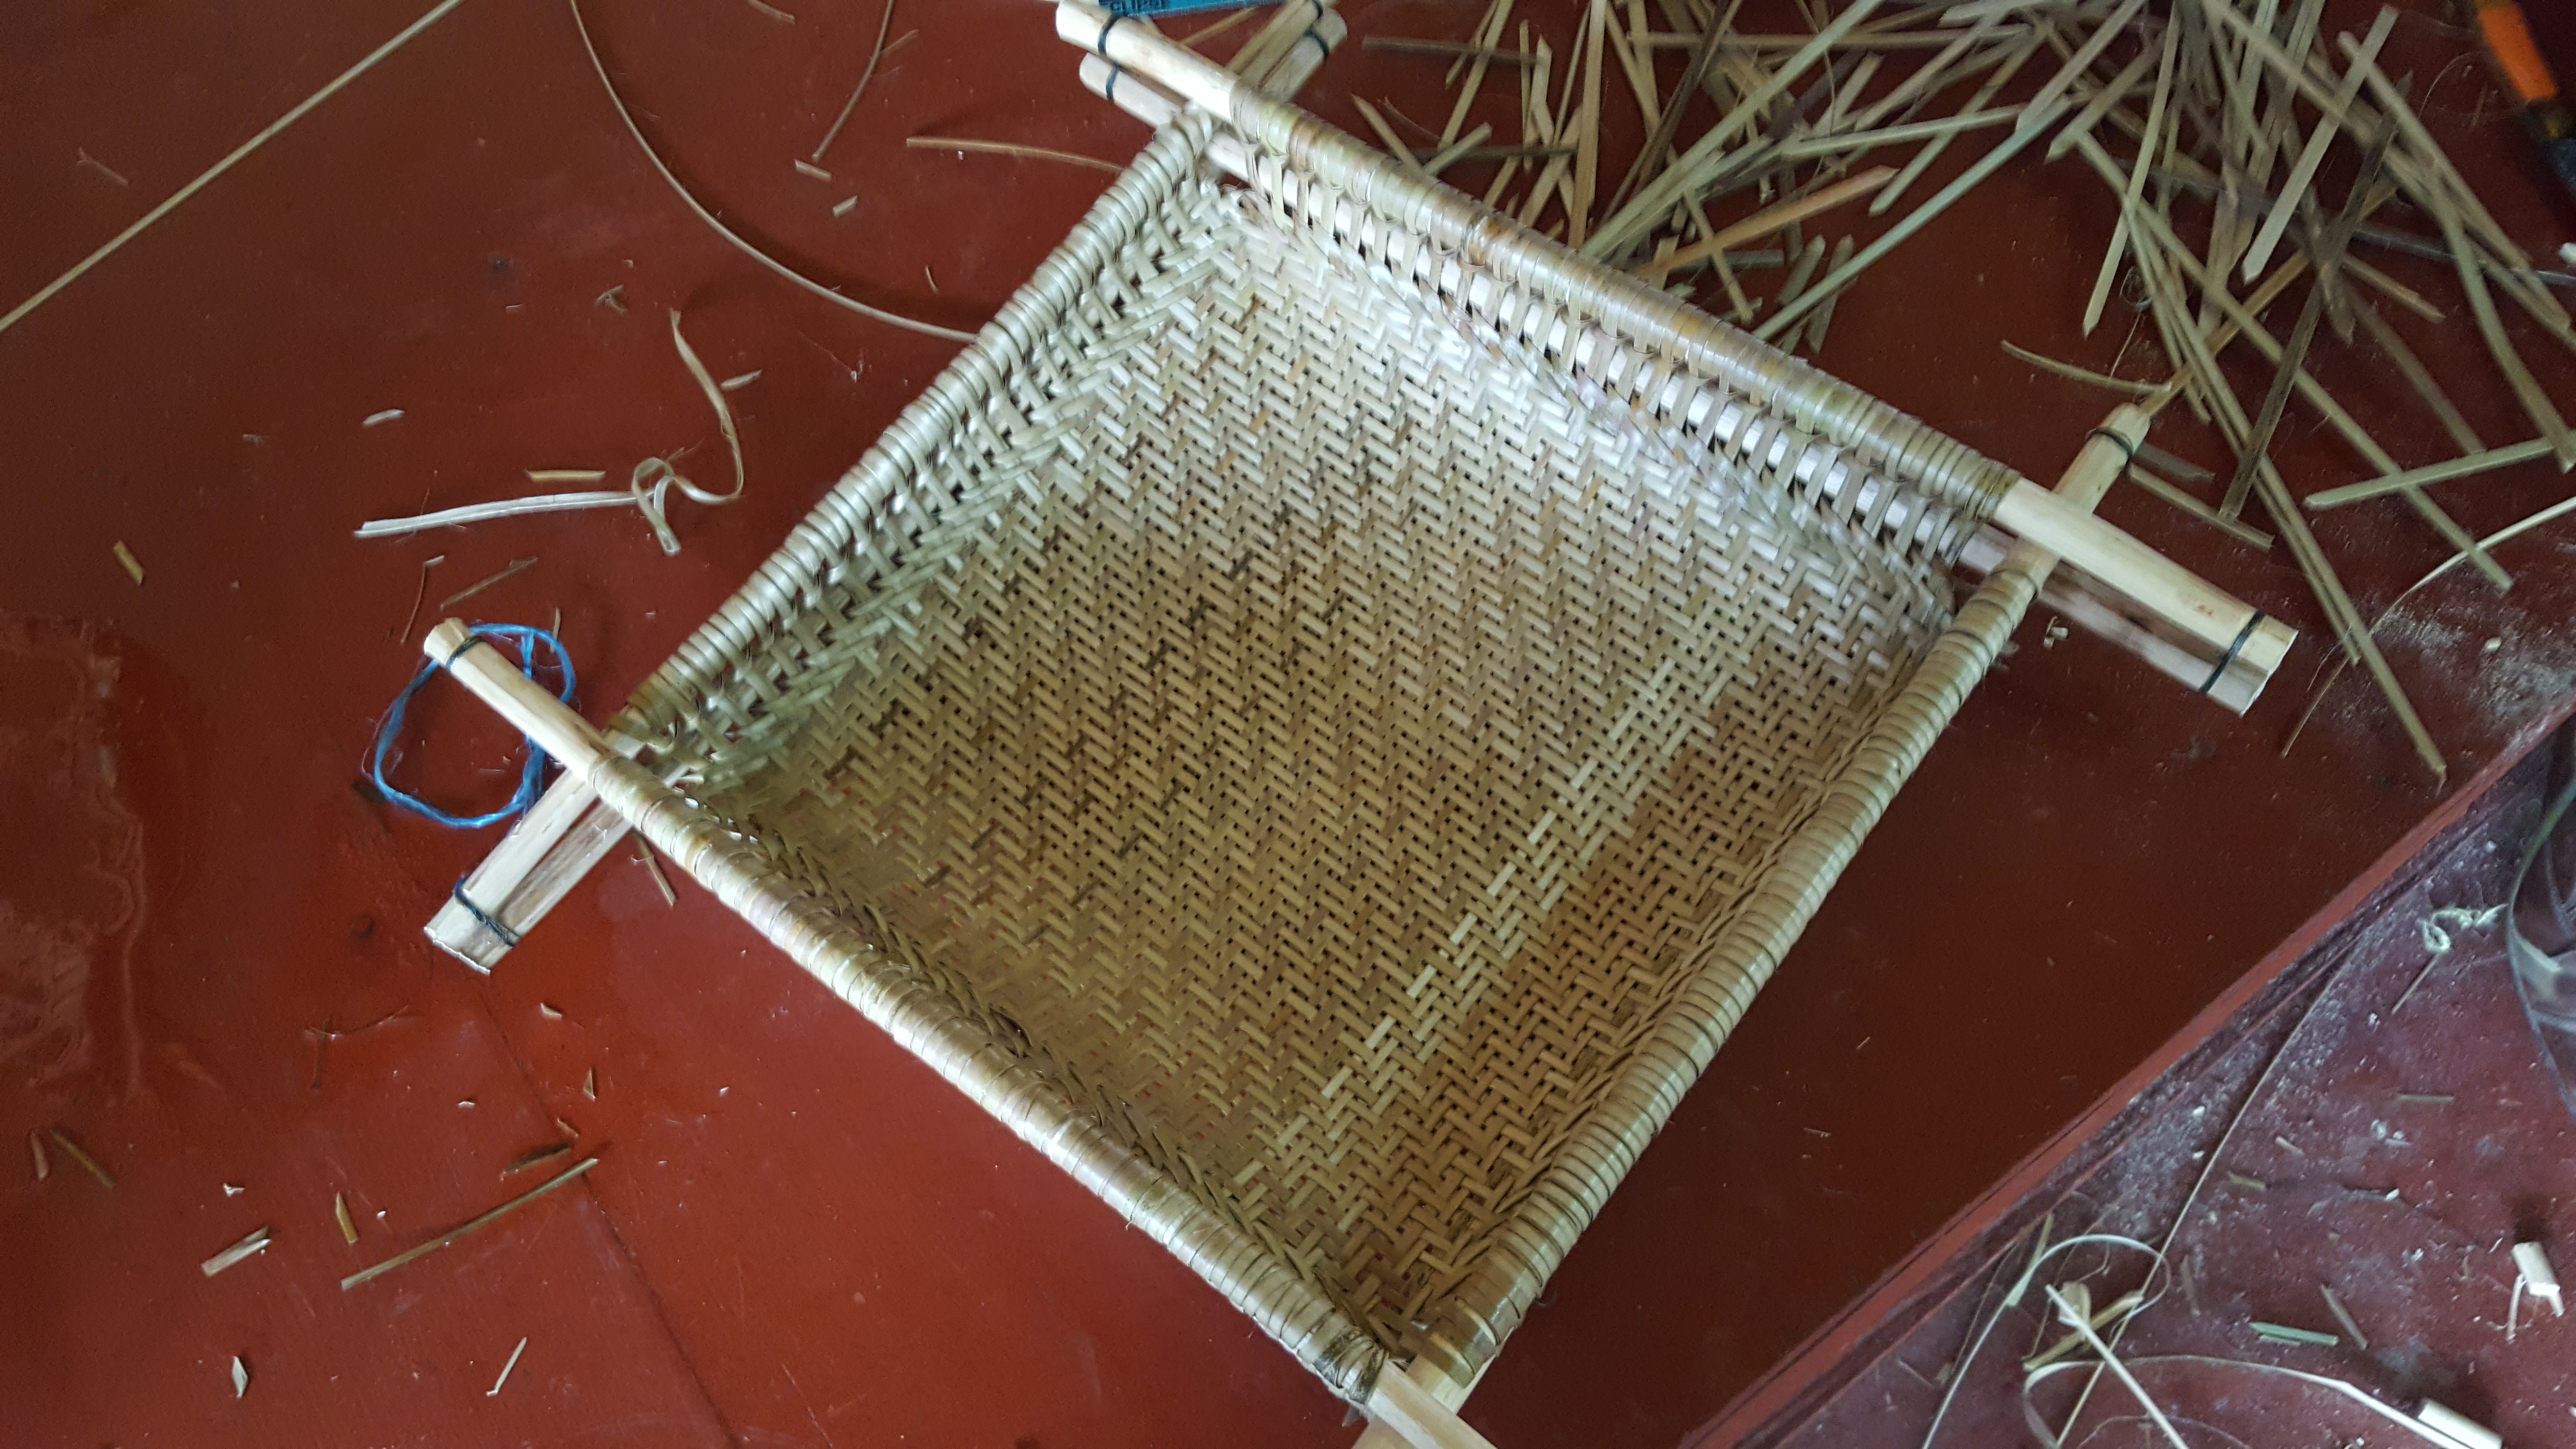 small example of an indigenous sieve for making cassava bread - image credit Carinya Sharples